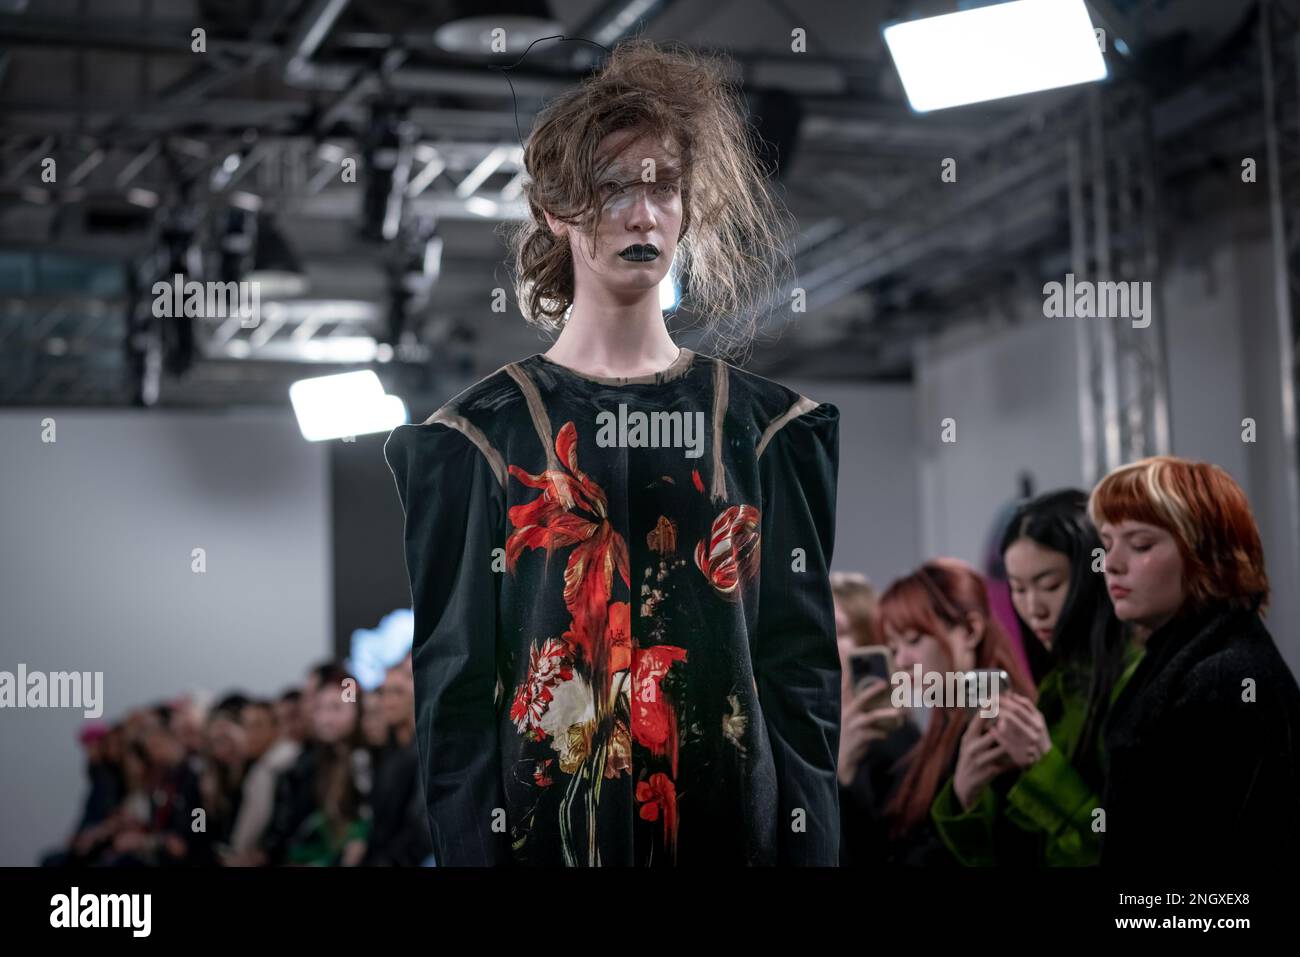 https://c8.alamy.com/comp/2NGXEX8/london-uk-18th-february-2023-london-fashion-week-ia-london-presents-asymmetrix-at-protein-studios-in-shoreditch-the-runway-show-of-sustainable-ethically-produced-womenswear-holds-a-strong-artistic-brand-identity-and-is-entirely-manufactured-in-england-credit-guy-corbishleyempicsalamy-live-news-2NGXEX8.jpg